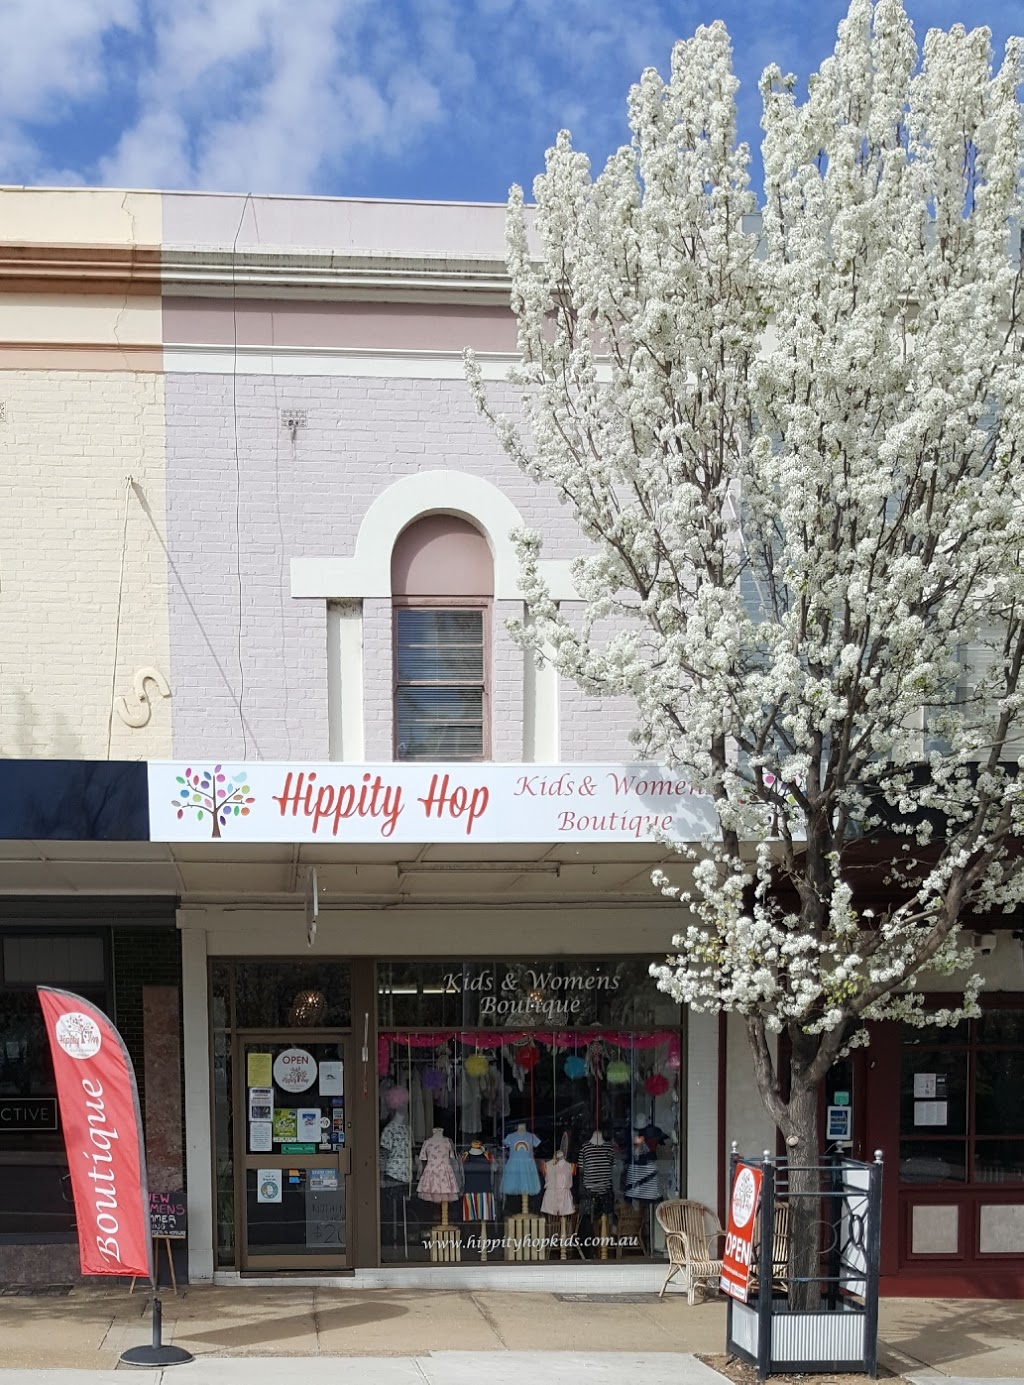 Hippity Hop Kids & Womens Boutique | clothing store | 7 Kendal St, Cowra NSW 2794, Australia | 0263421599 OR +61 2 6342 1599